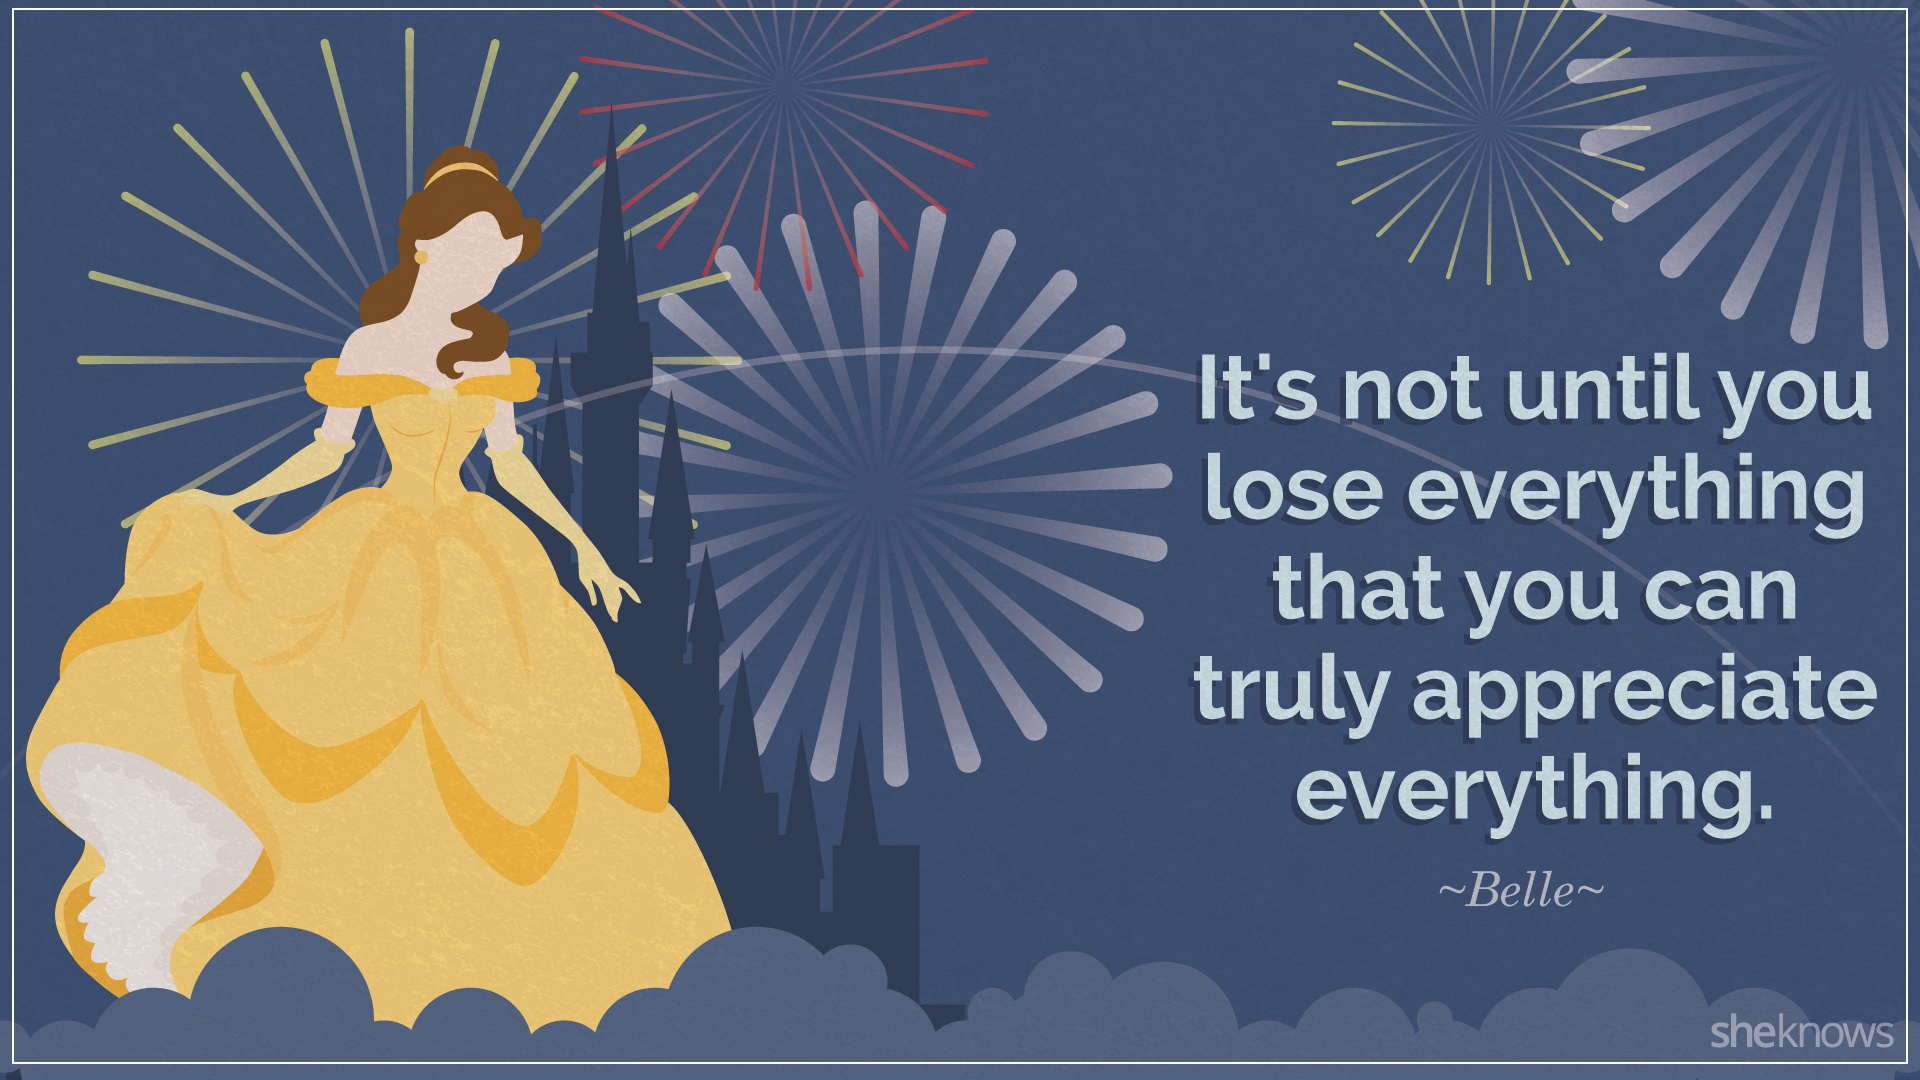 Inspirational Quotes From Your Favorite Disney Princesses - Famous Line Of Princess Belle - HD Wallpaper 